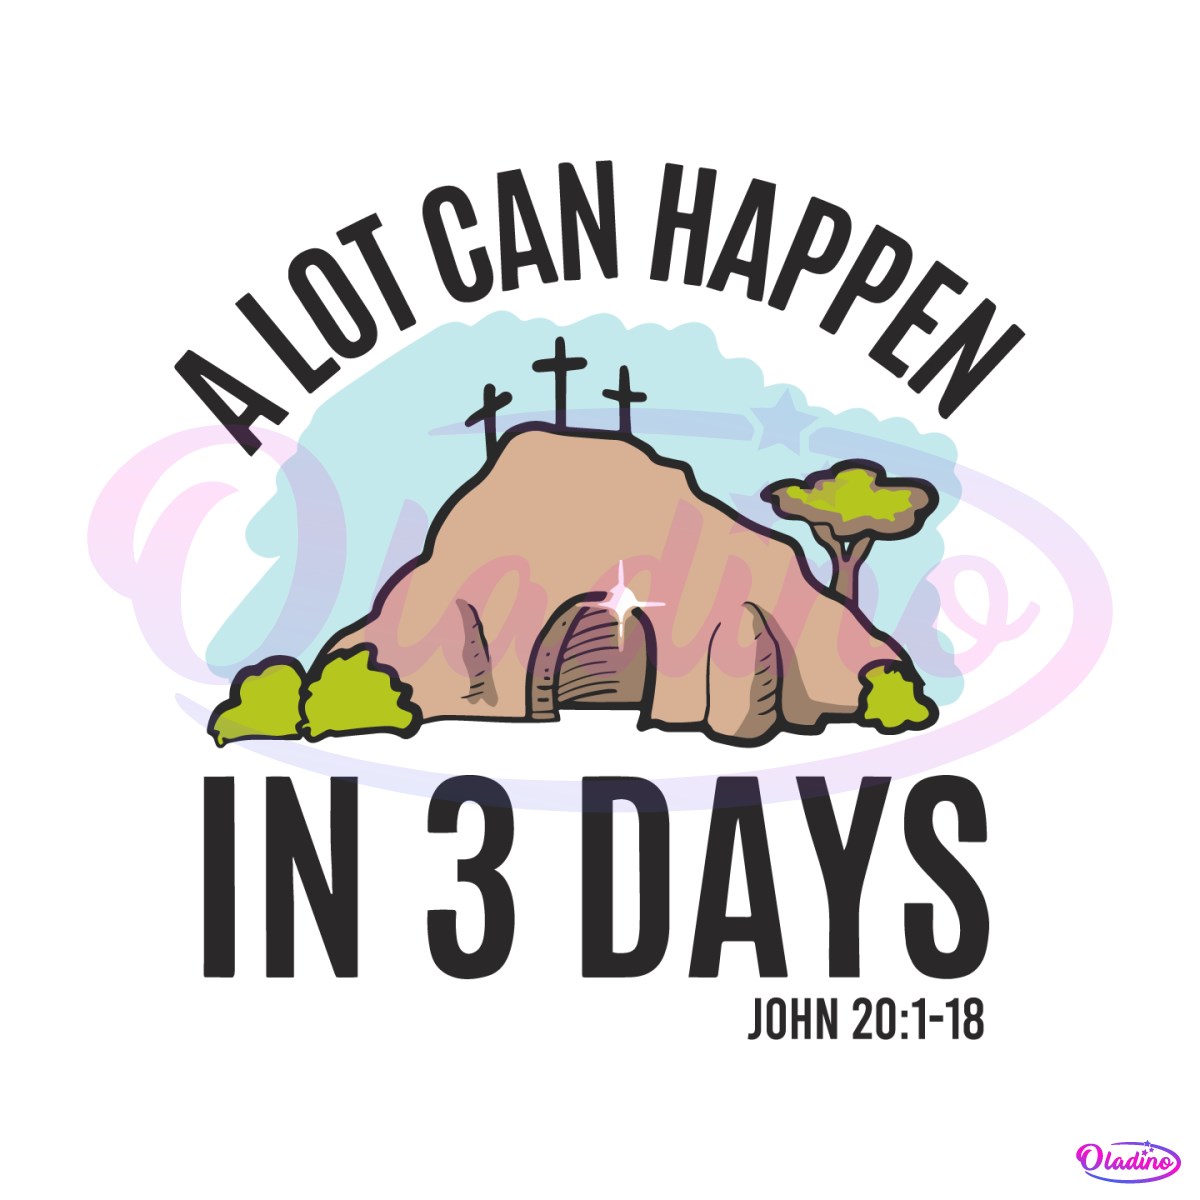 christian-easter-a-lot-can-happen-in-3-days-svg